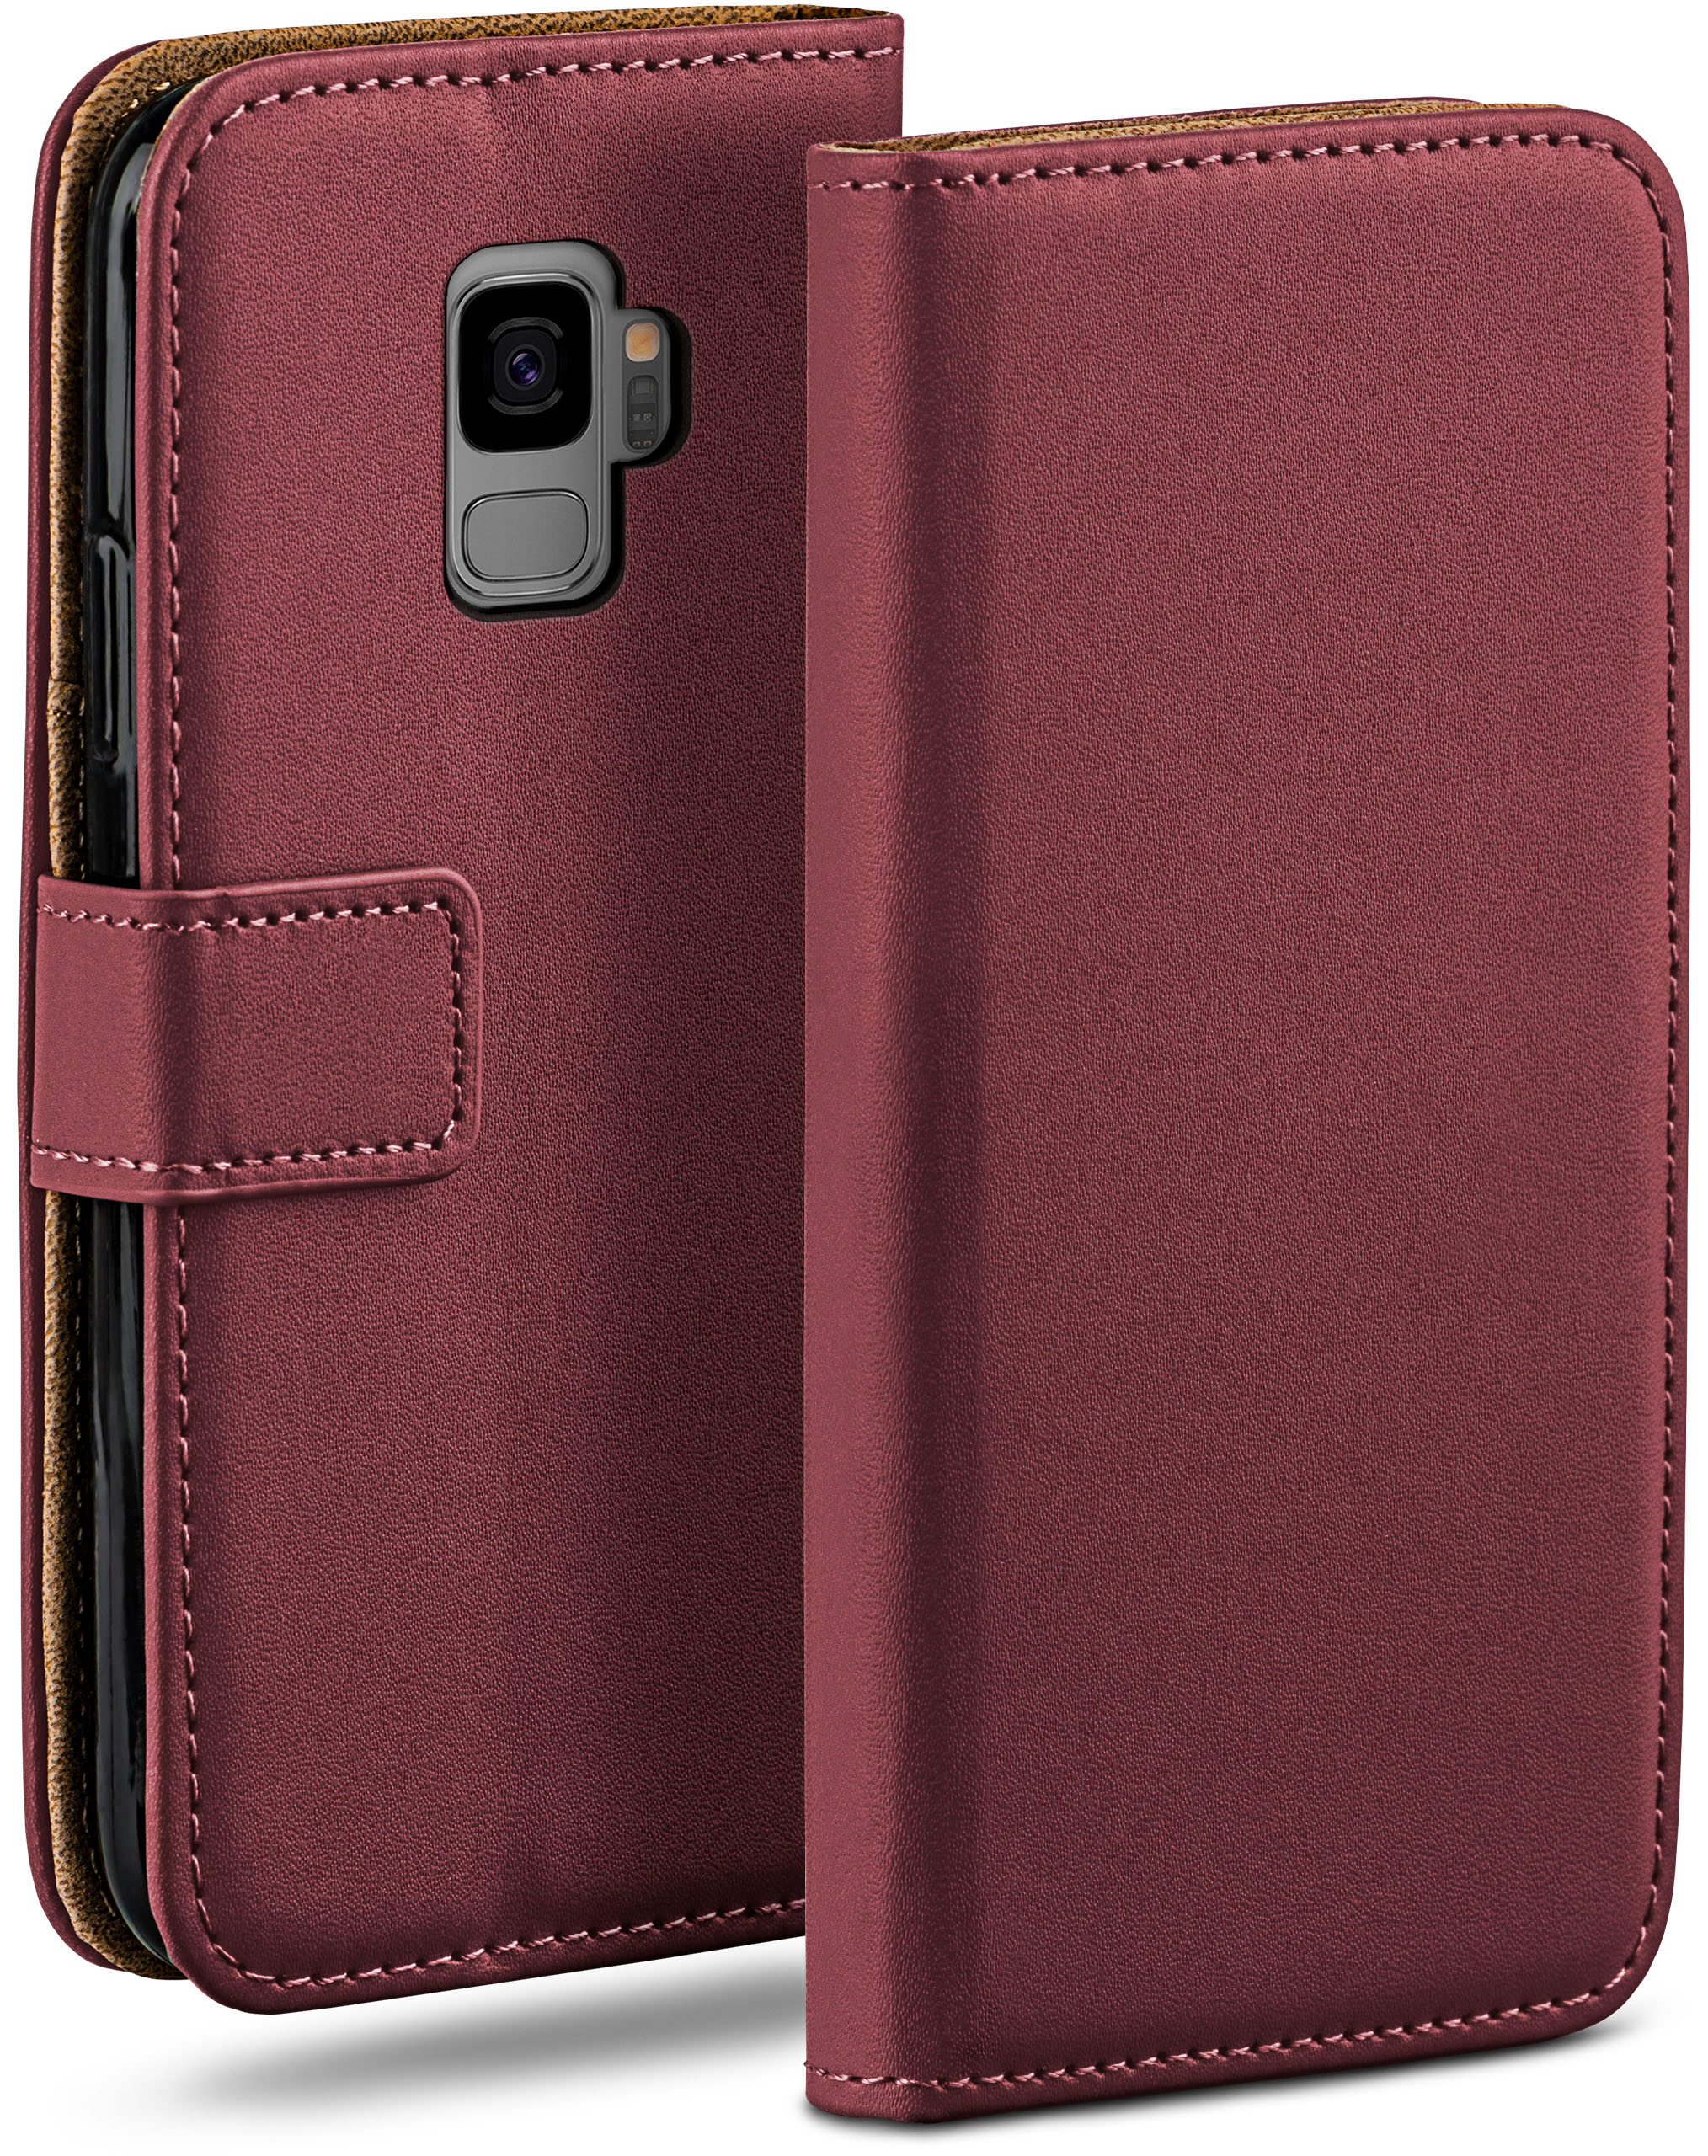 MOEX Book S9, Samsung, Maroon-Red Galaxy Case, Bookcover